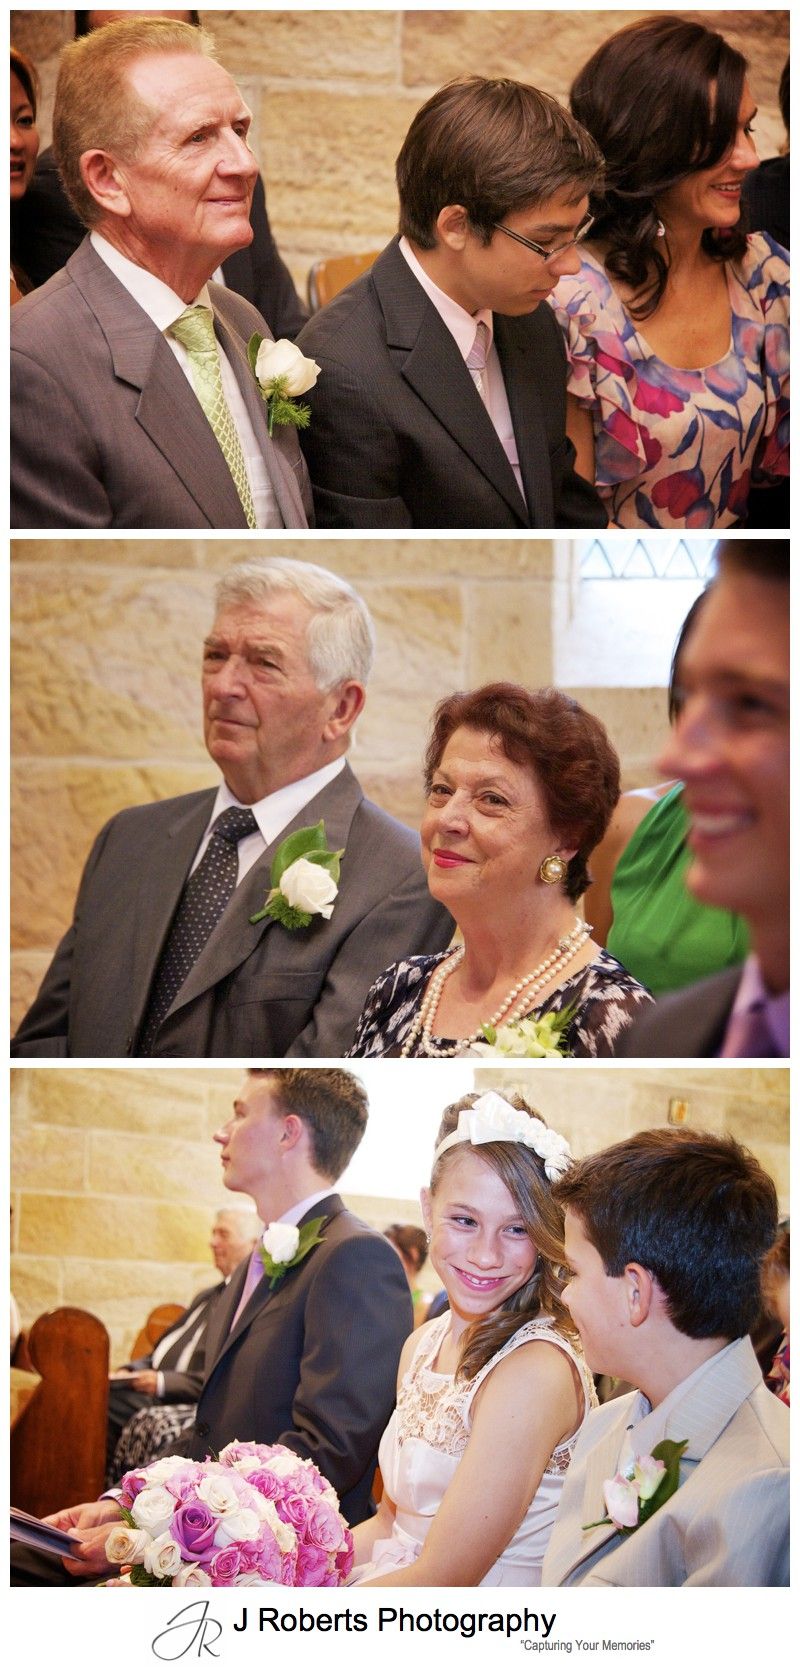 Family looking on as couple marry - wedding photography sydney